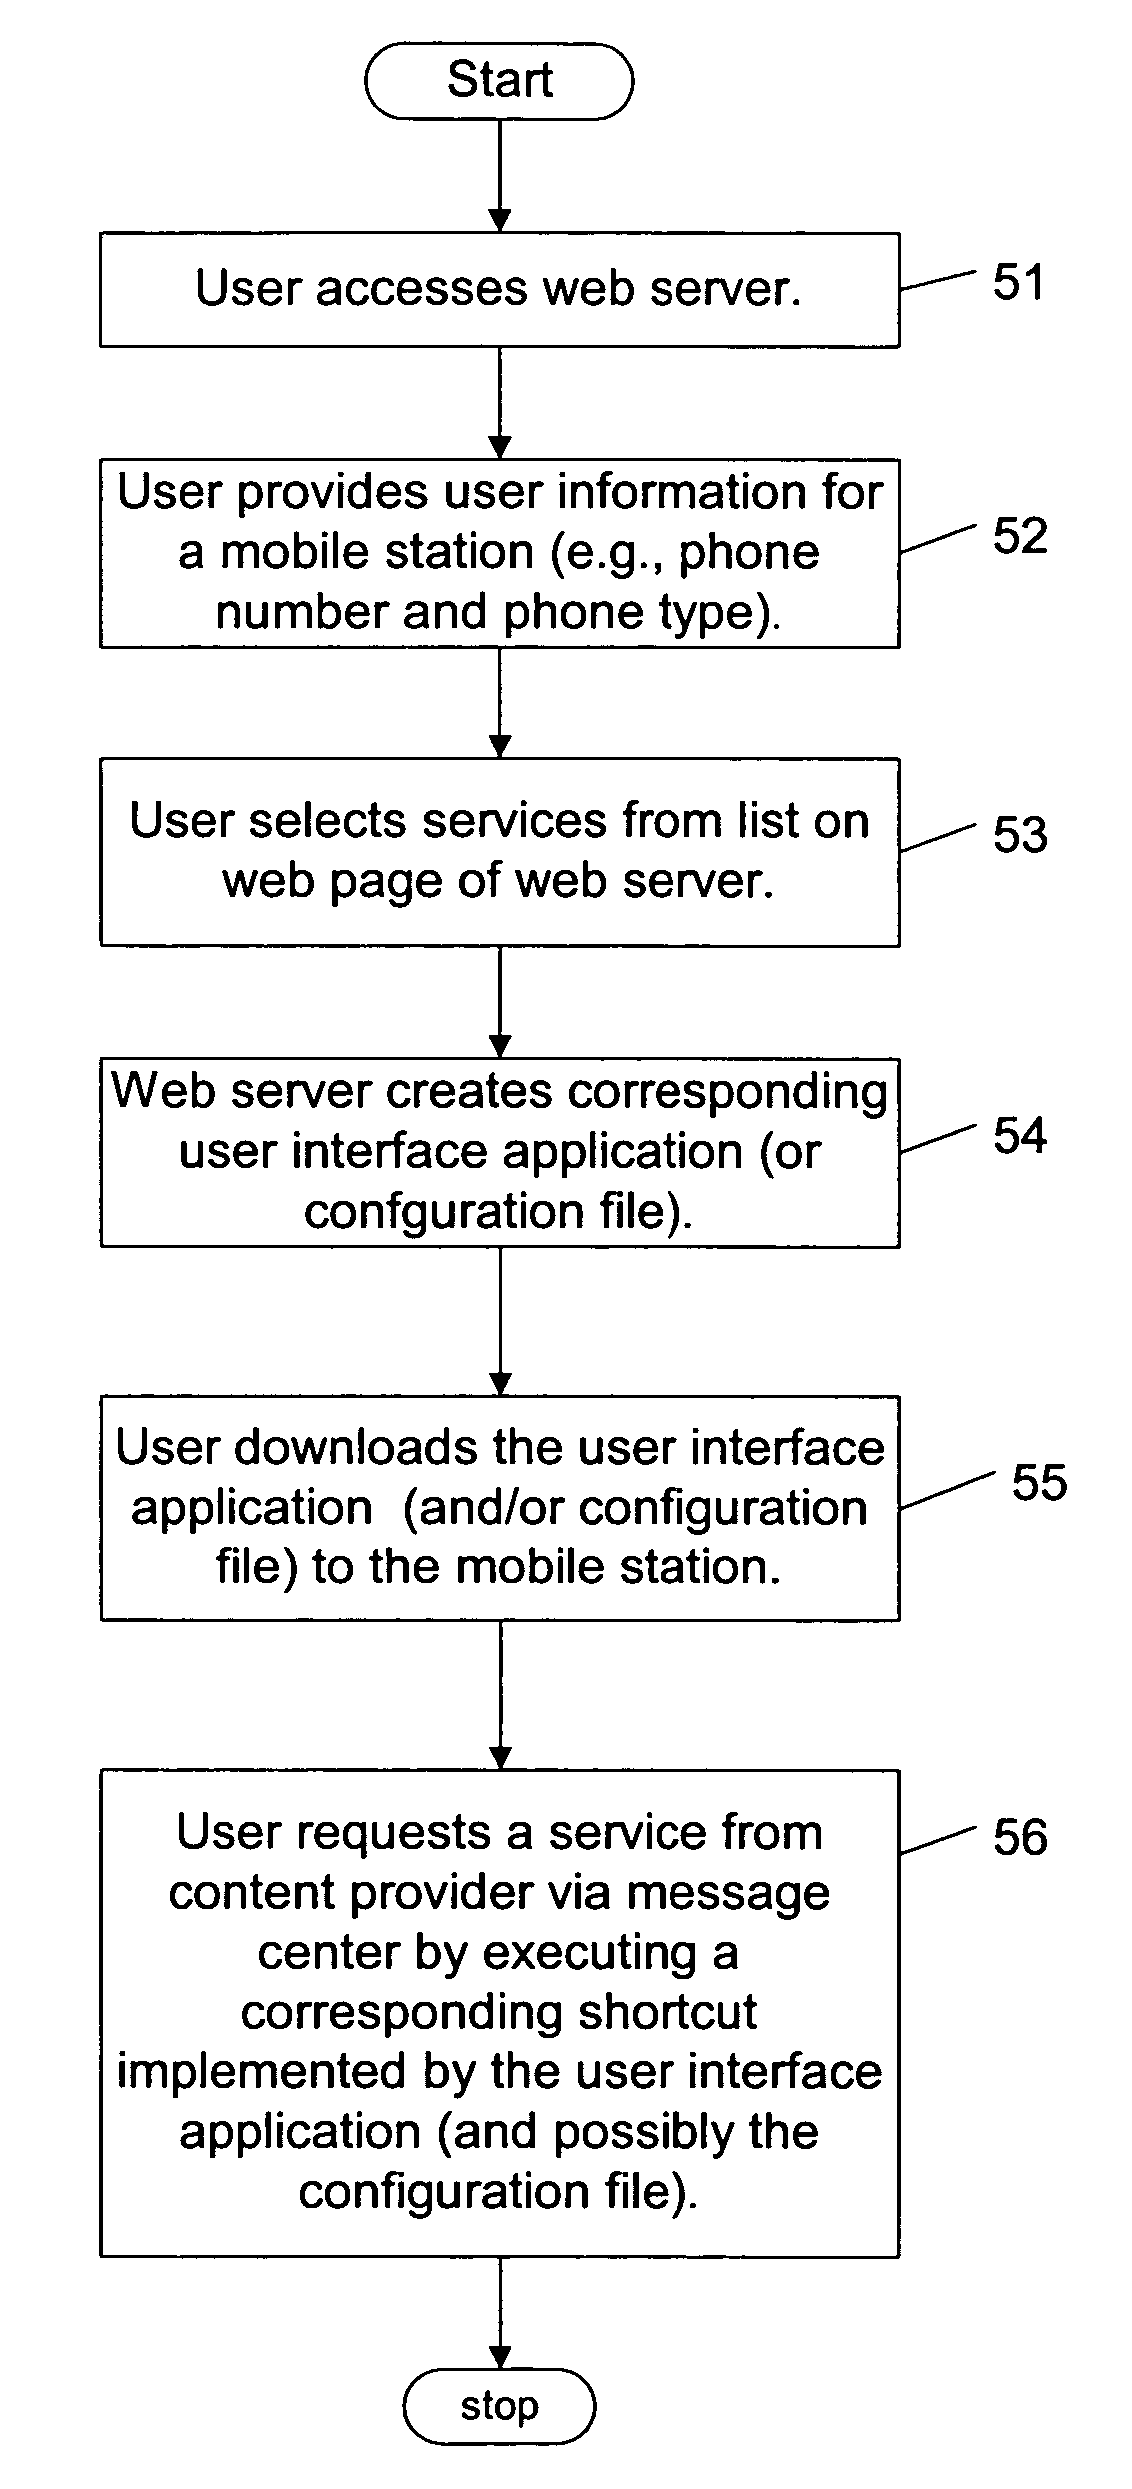 Shortcut generator for services accessible via a messaging service system